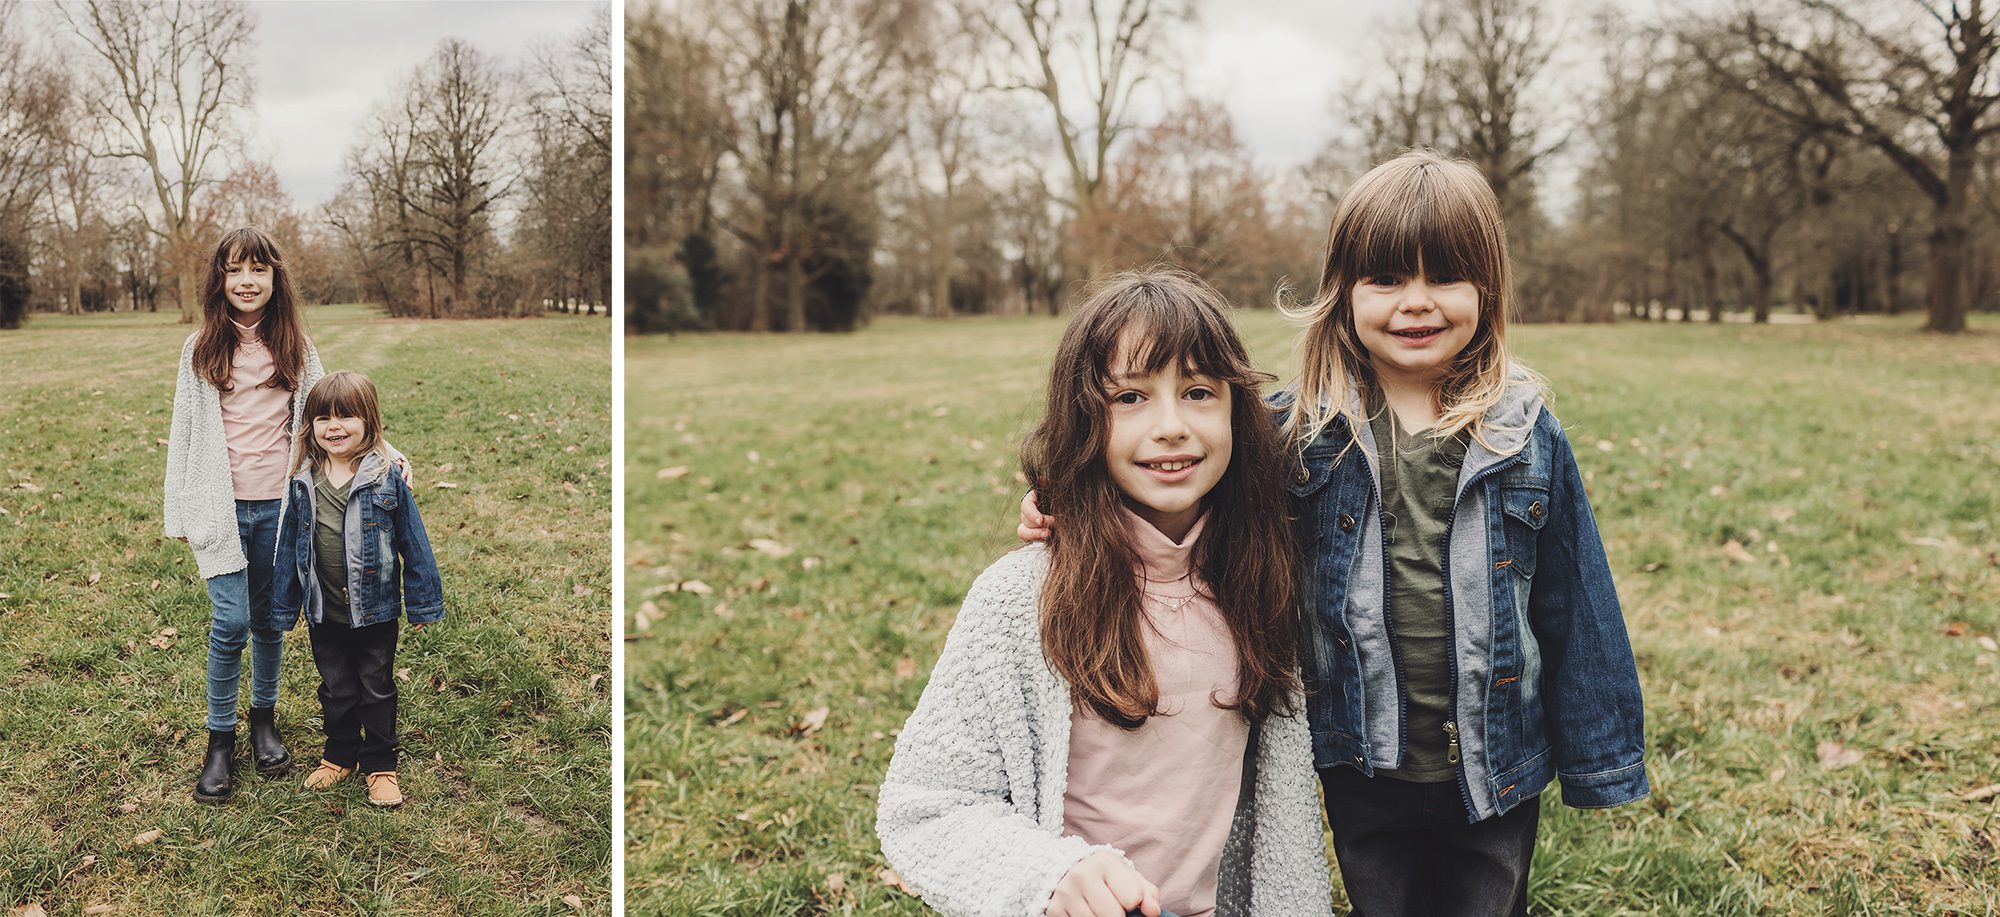 The Castelli children during a family photo session at Biebrich park in Wiesbaden